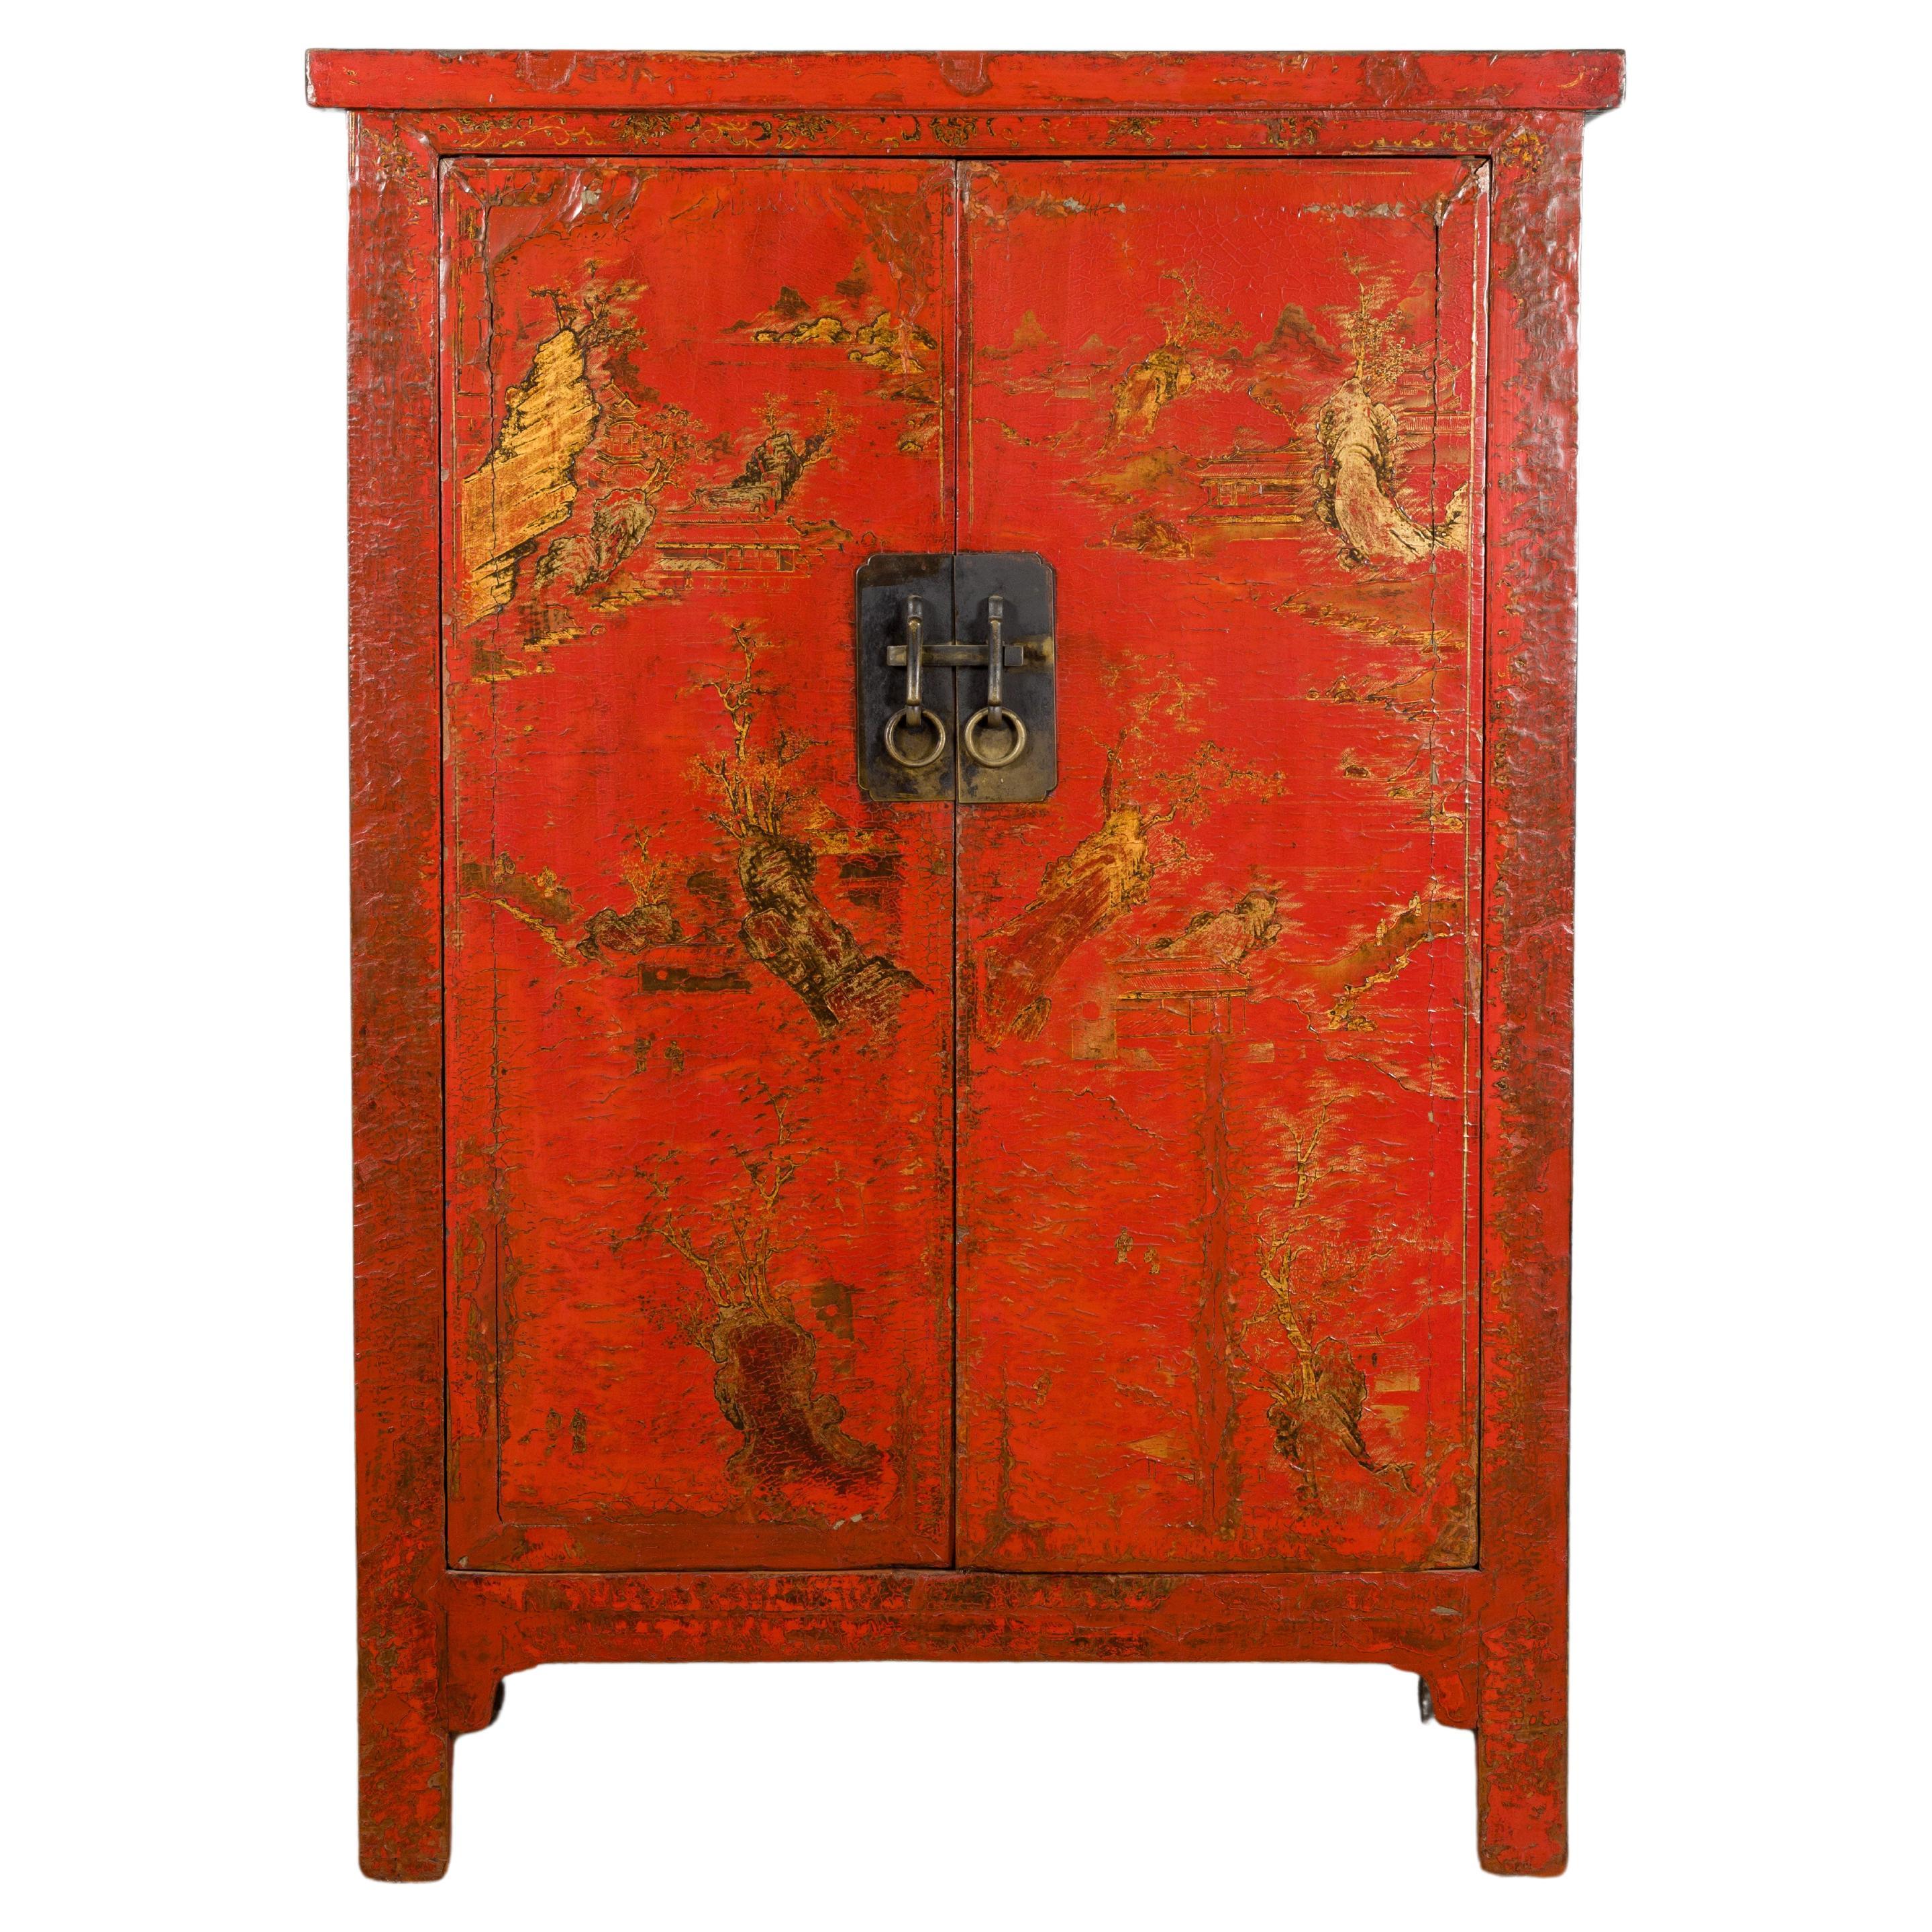 Chinese Qing Dynasty 19th Century Hand-Painted Cabinet with Original Red Lacquer